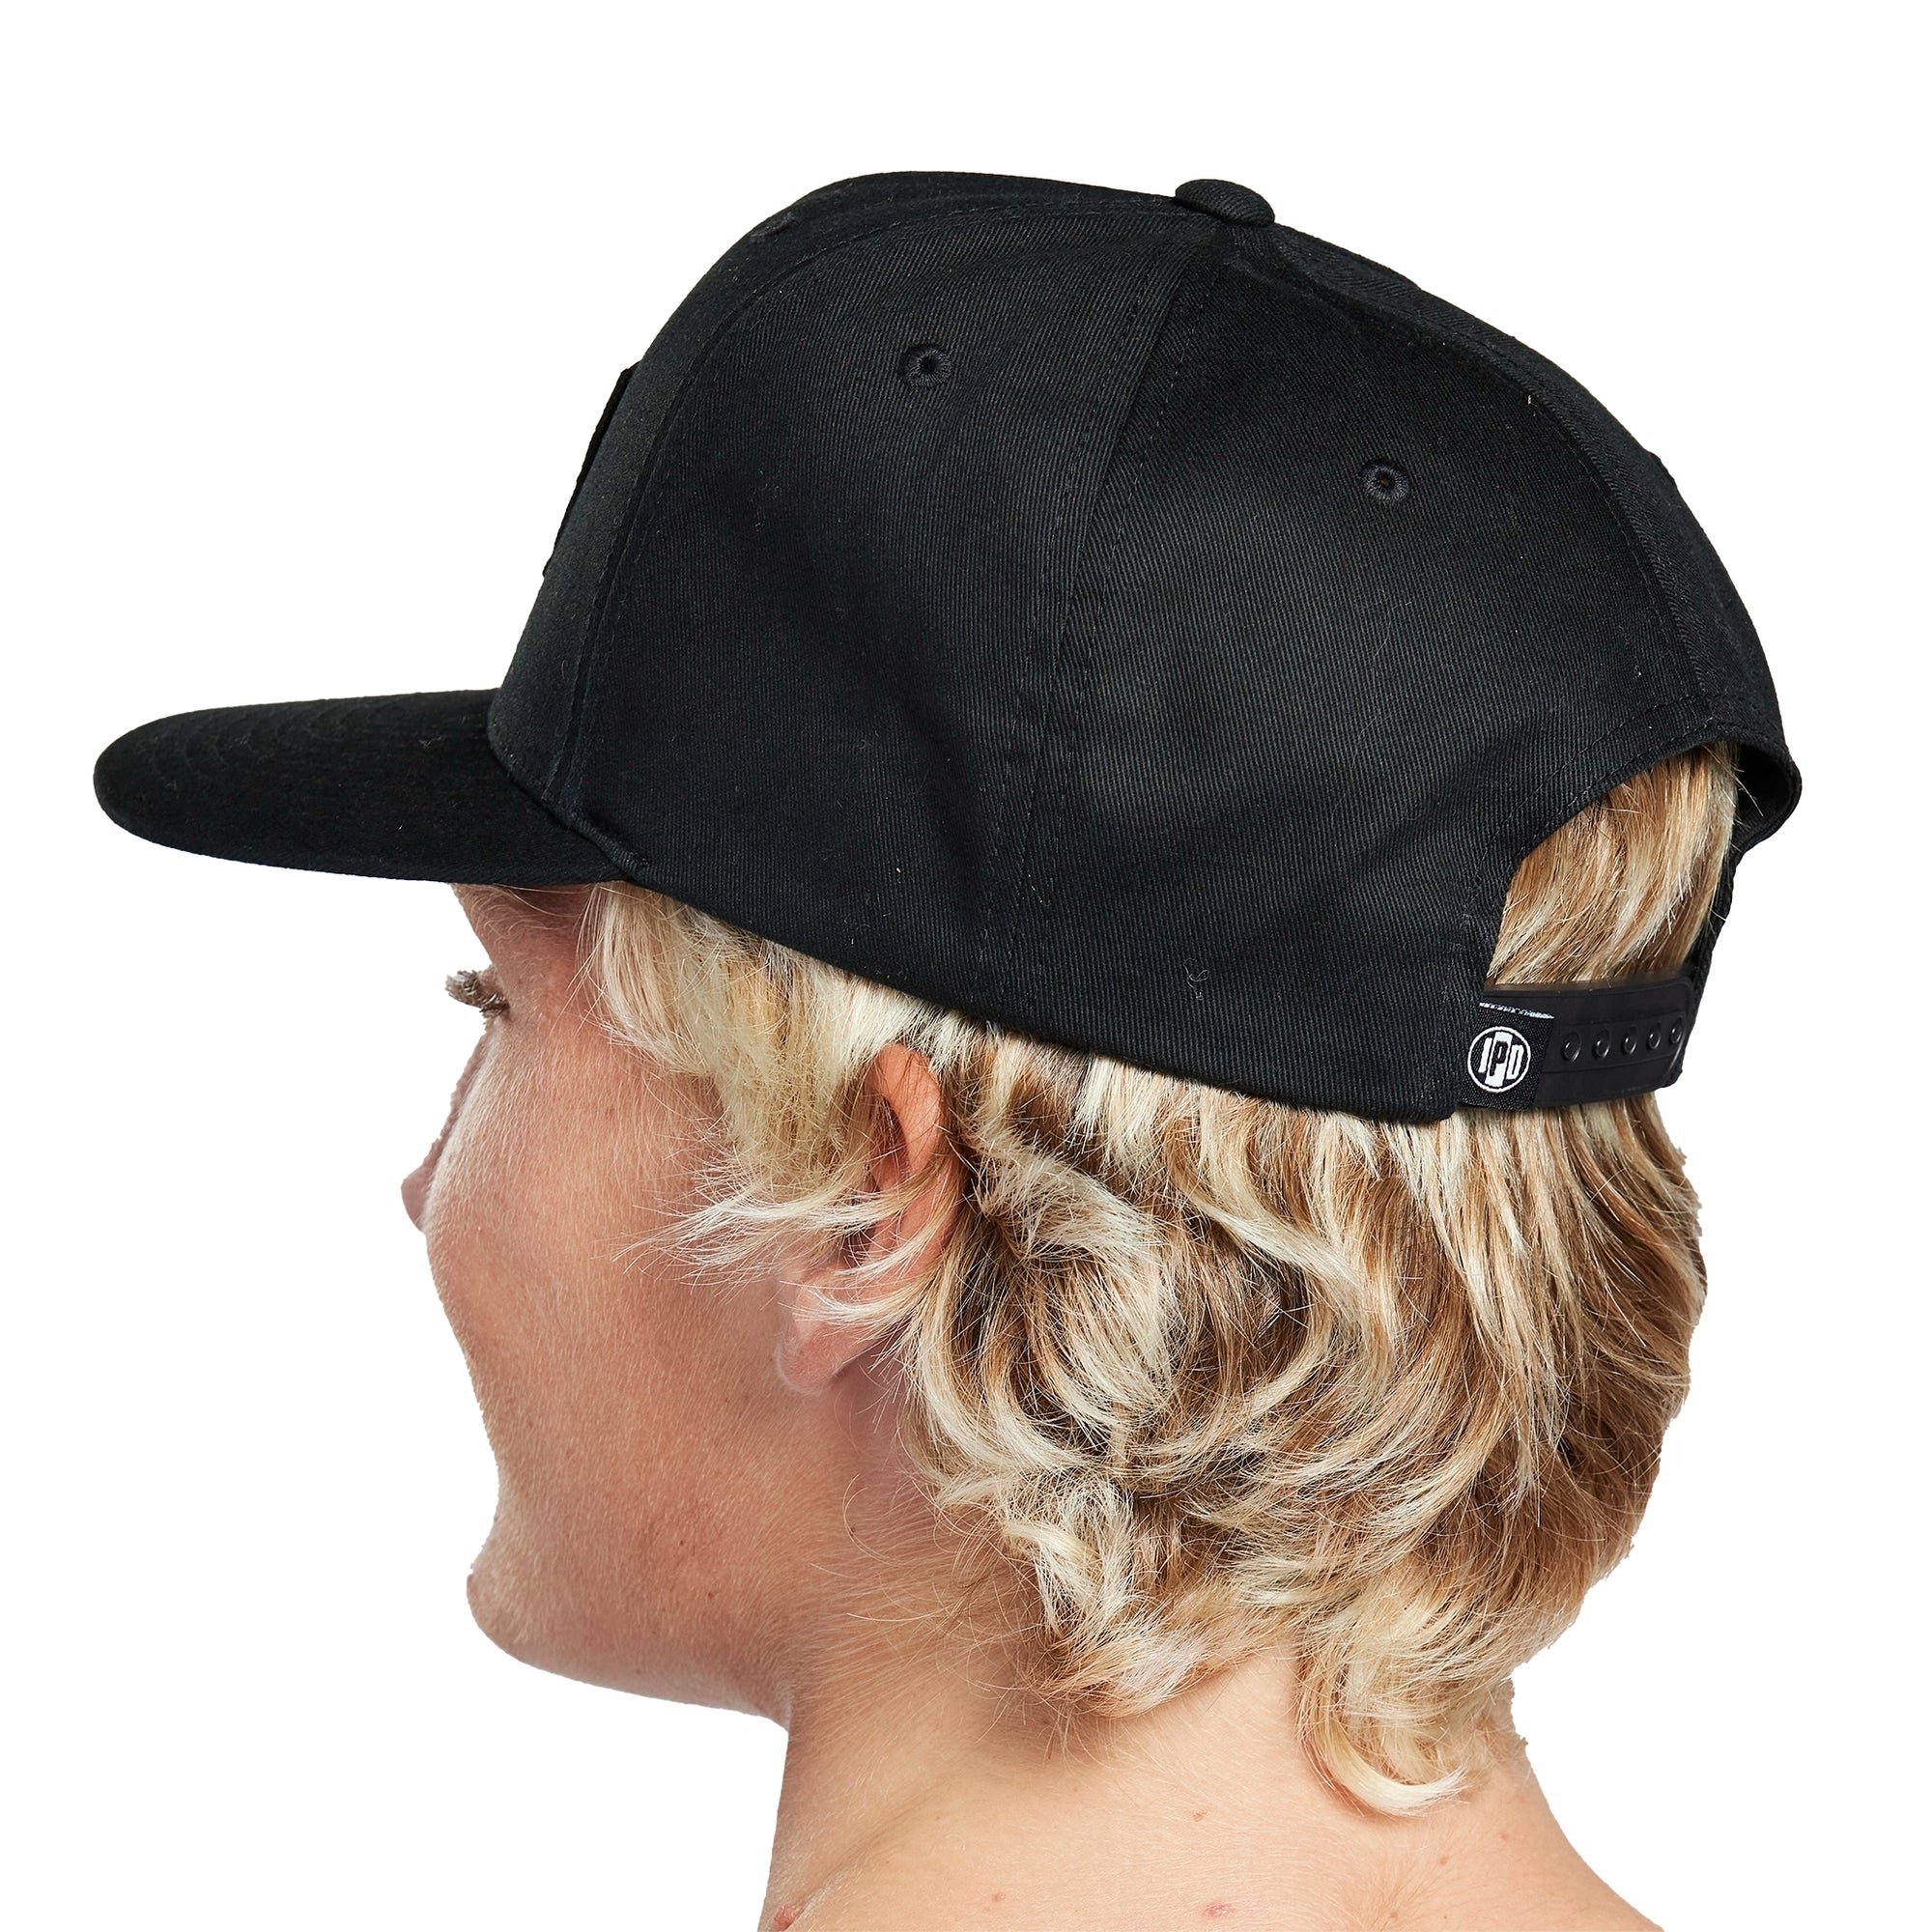 Headshot of a young man wearing a black hat with a white patch on the front. There are two wavy decorative lines running across the middle of the patch. The words I P D Surf Company are above the lines and there's a small I P D logo below the lines with the word Twenty on each side.